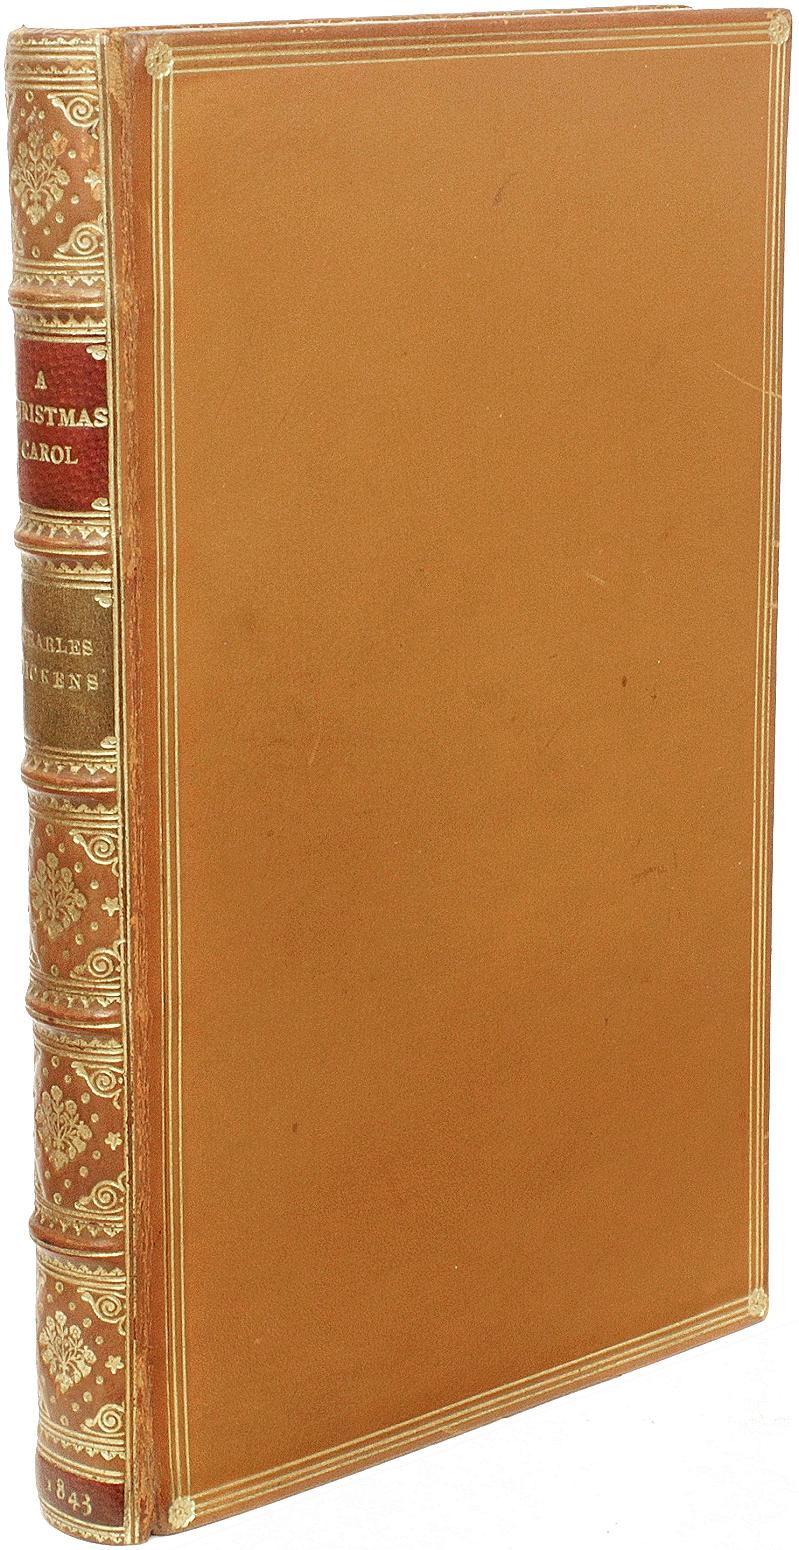 Charles DICKENS. A Christmas Carol – FIRST EDITION SECOND ISSUE – 1843 im Angebot 2